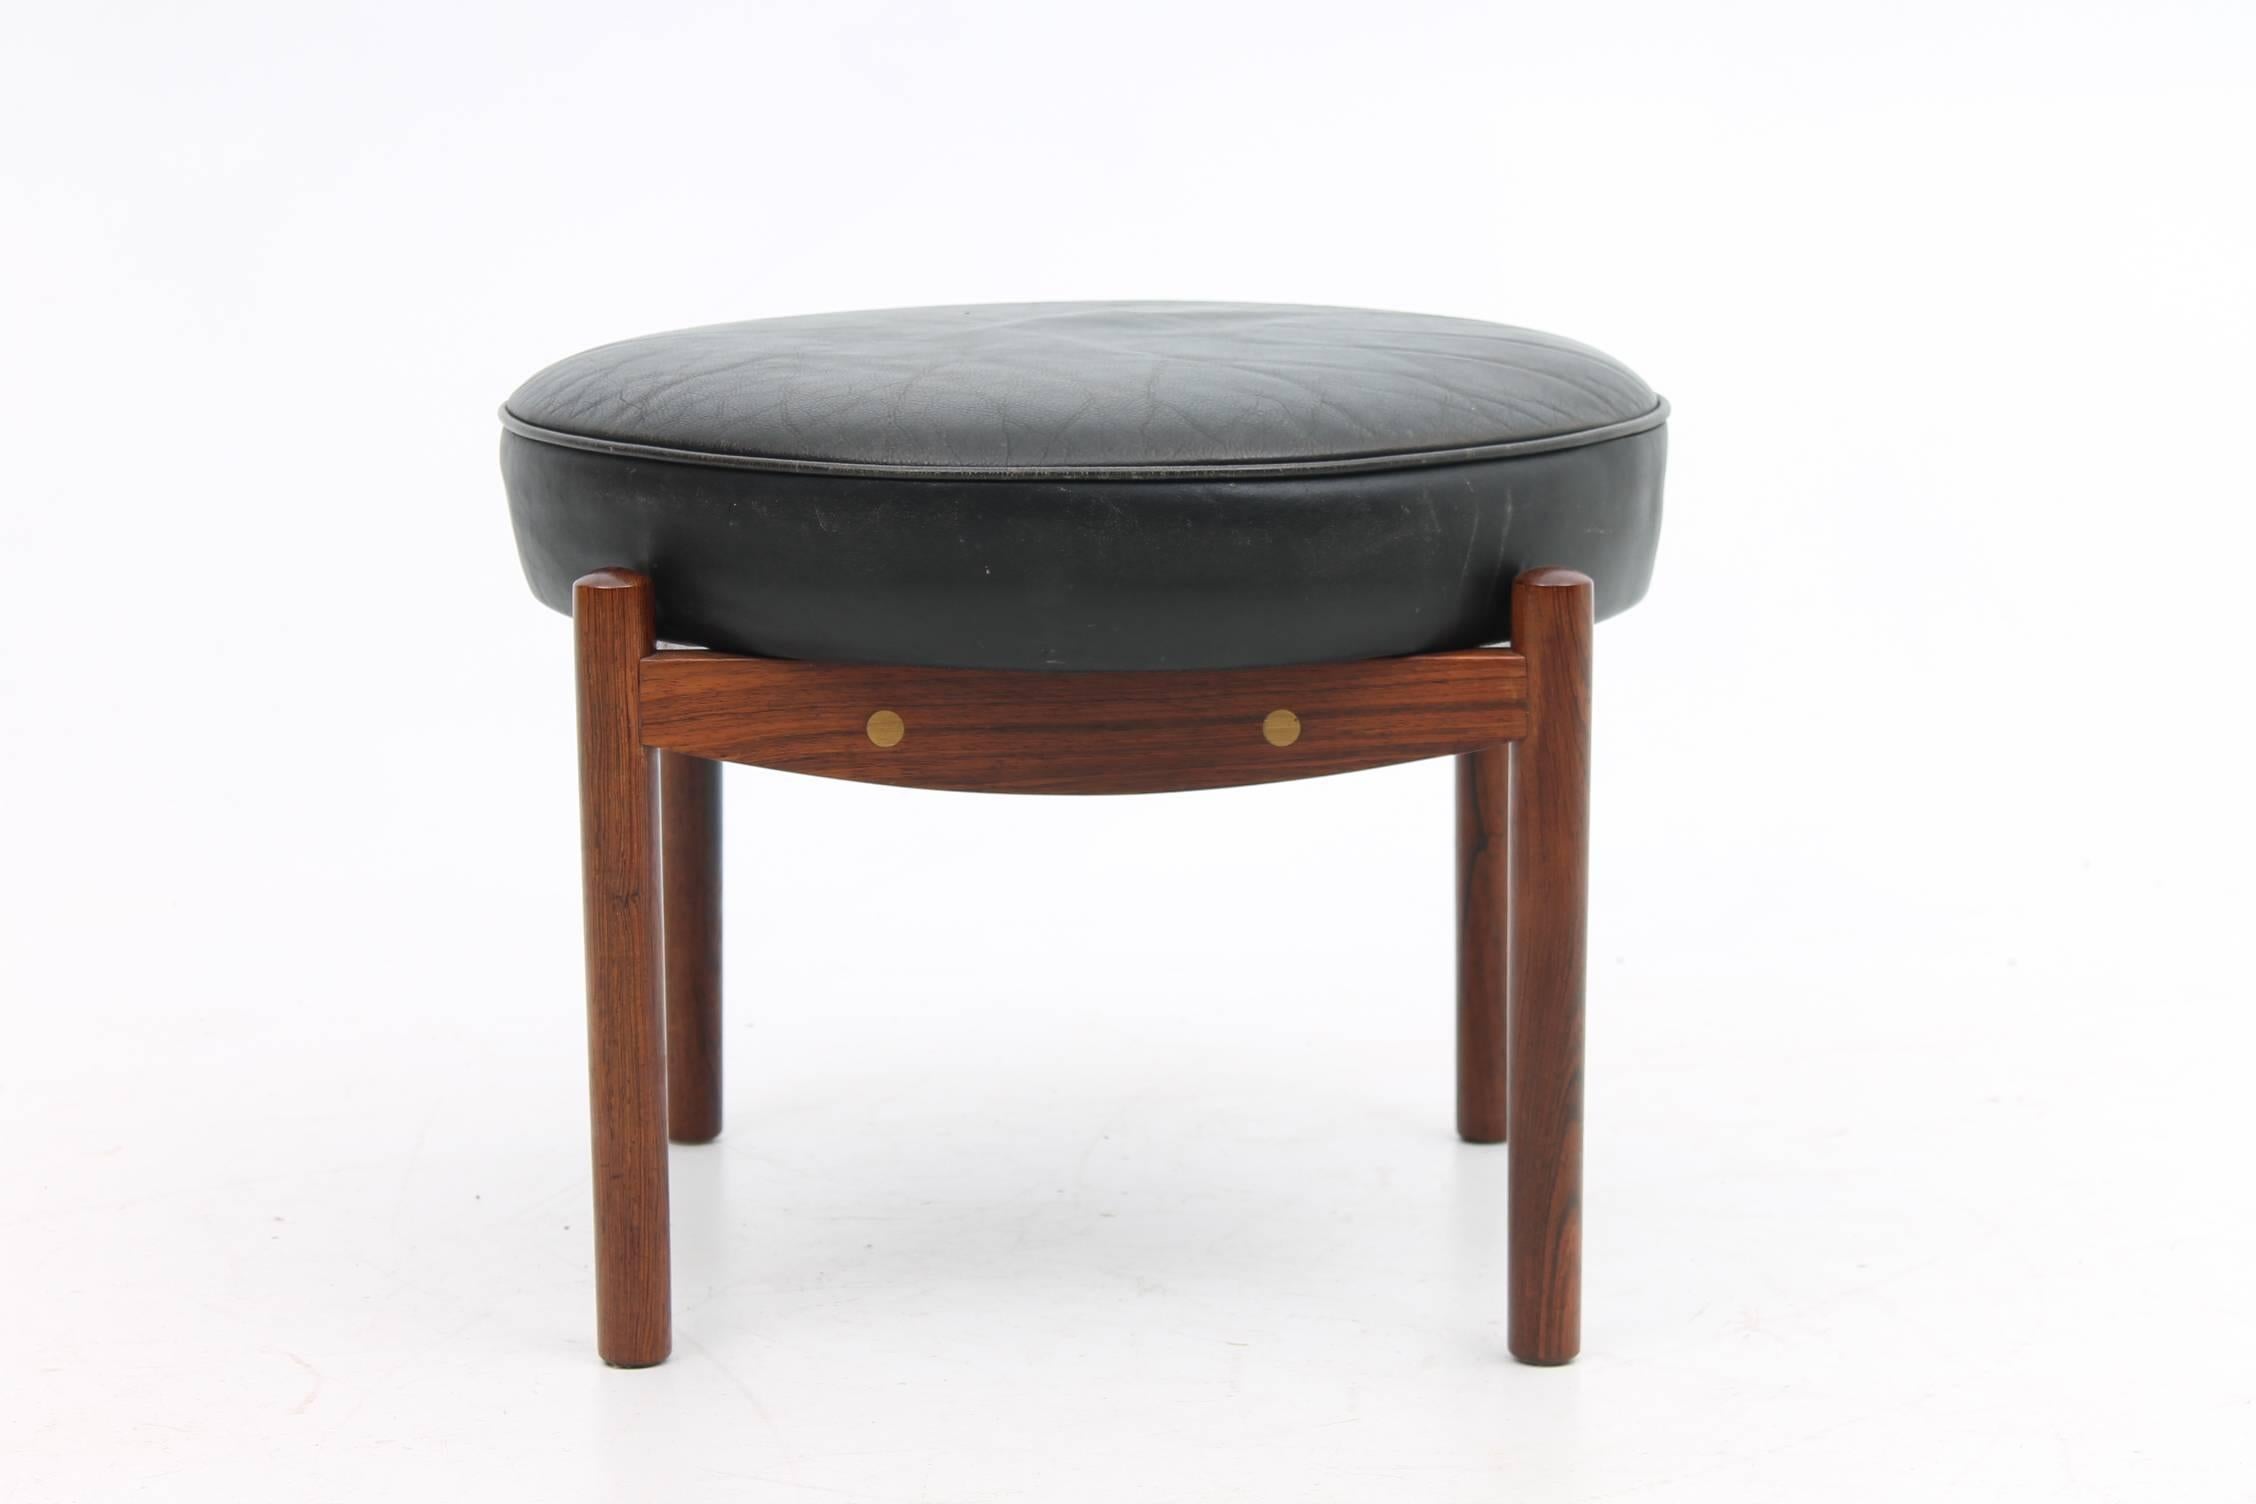 Beautiful footstool made of a rosewood frame with a circular leather cushion. The rosewood frame has a brass detail that can be seen from the side as an extra detail. The circular cushion fits perfectly in the square wooden frame.